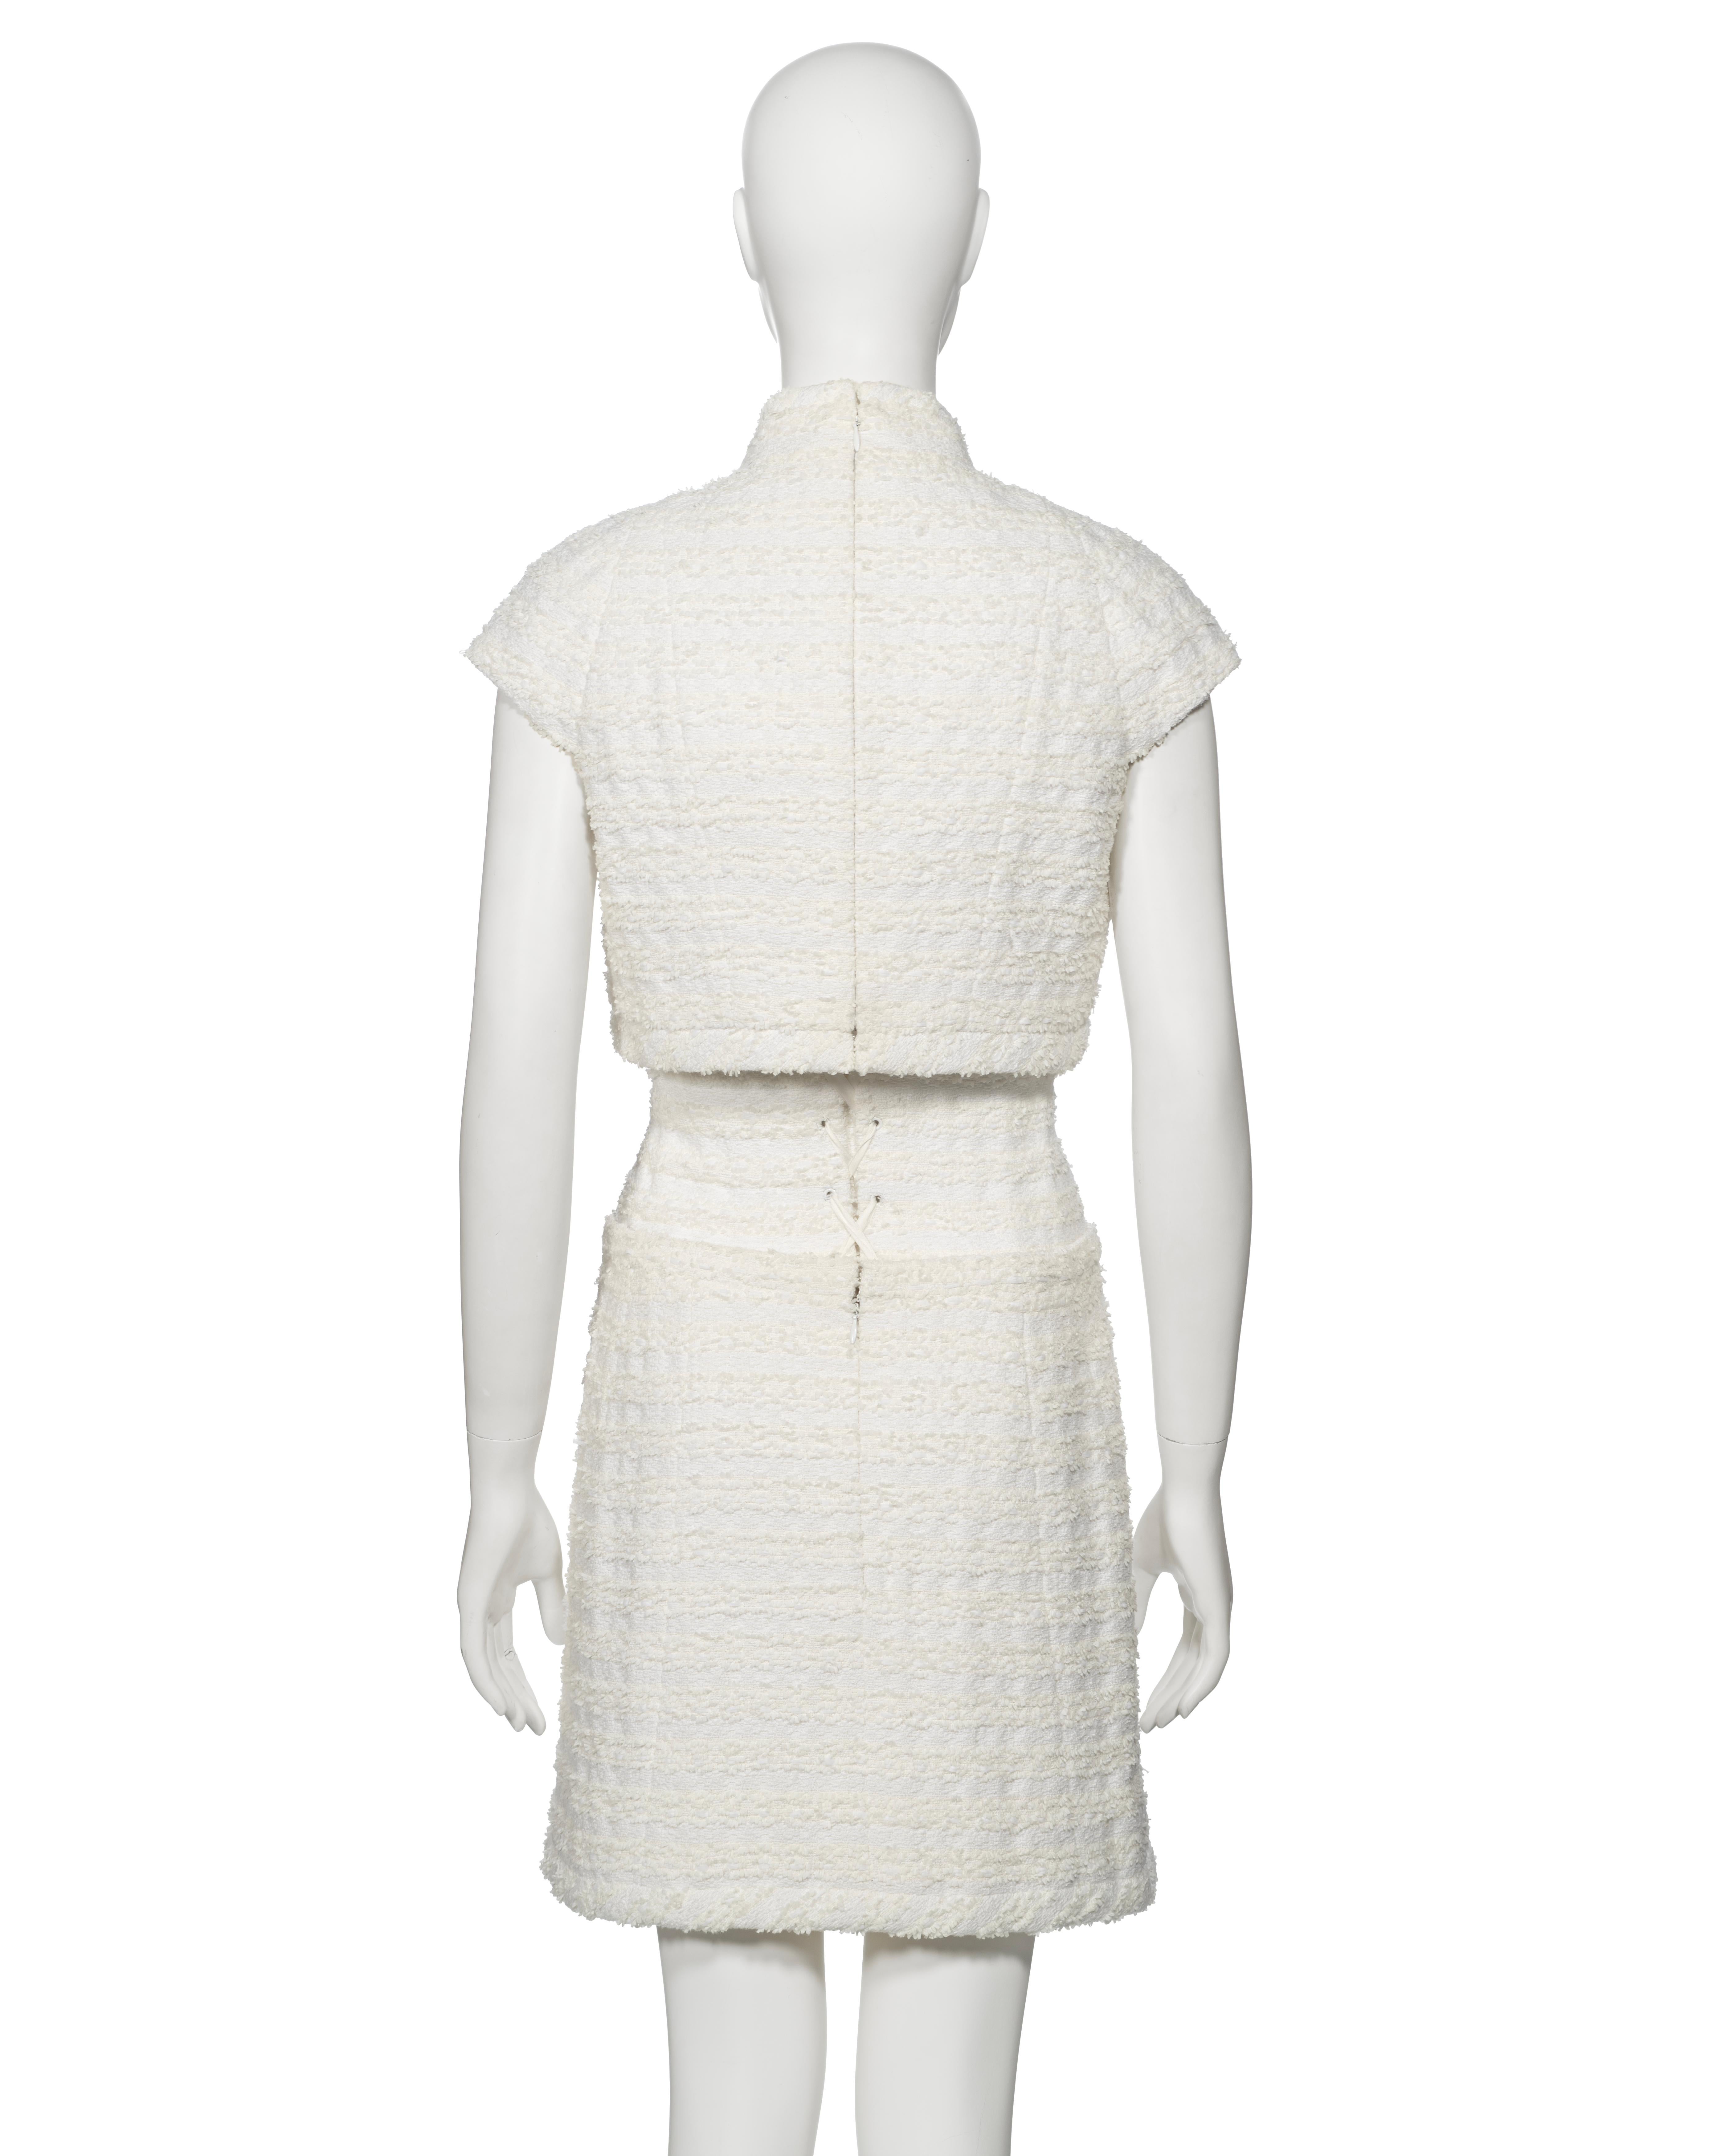 Chanel by Karl Lagerfeld Haute Couture White Bouclé Corseted Skirt Suit, ss 2014 For Sale 6